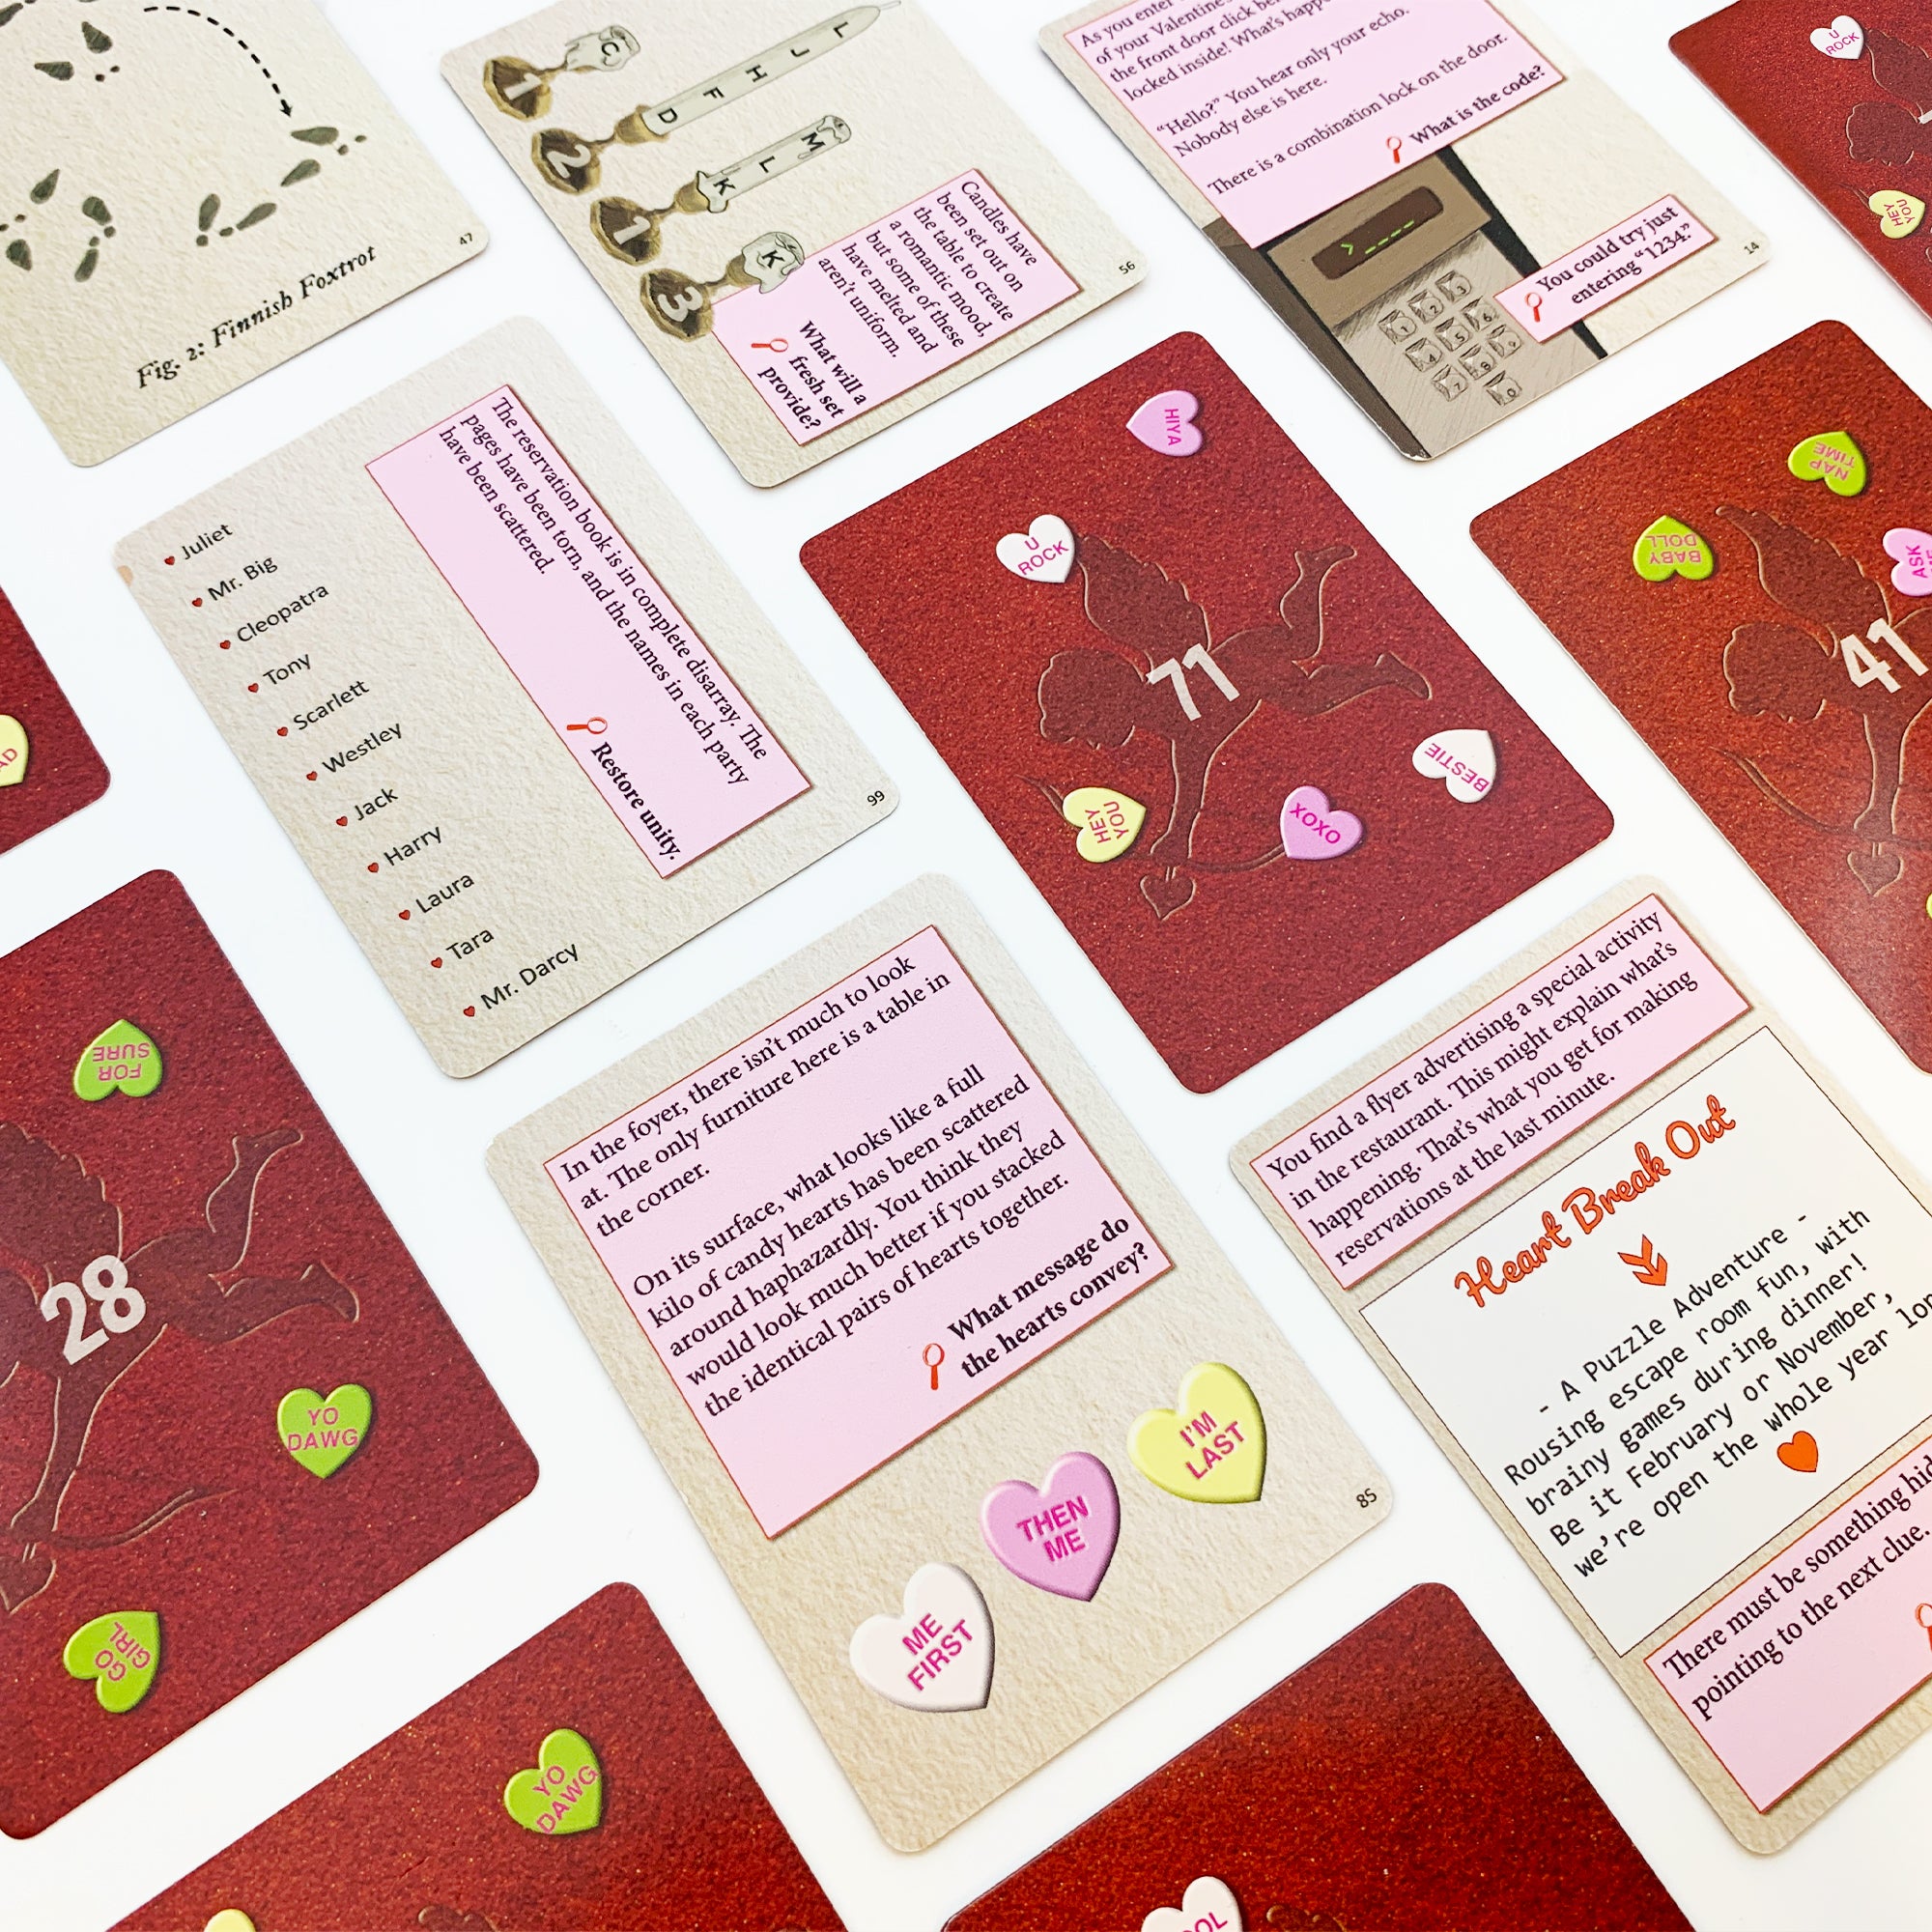 The Cupid Crisis cards